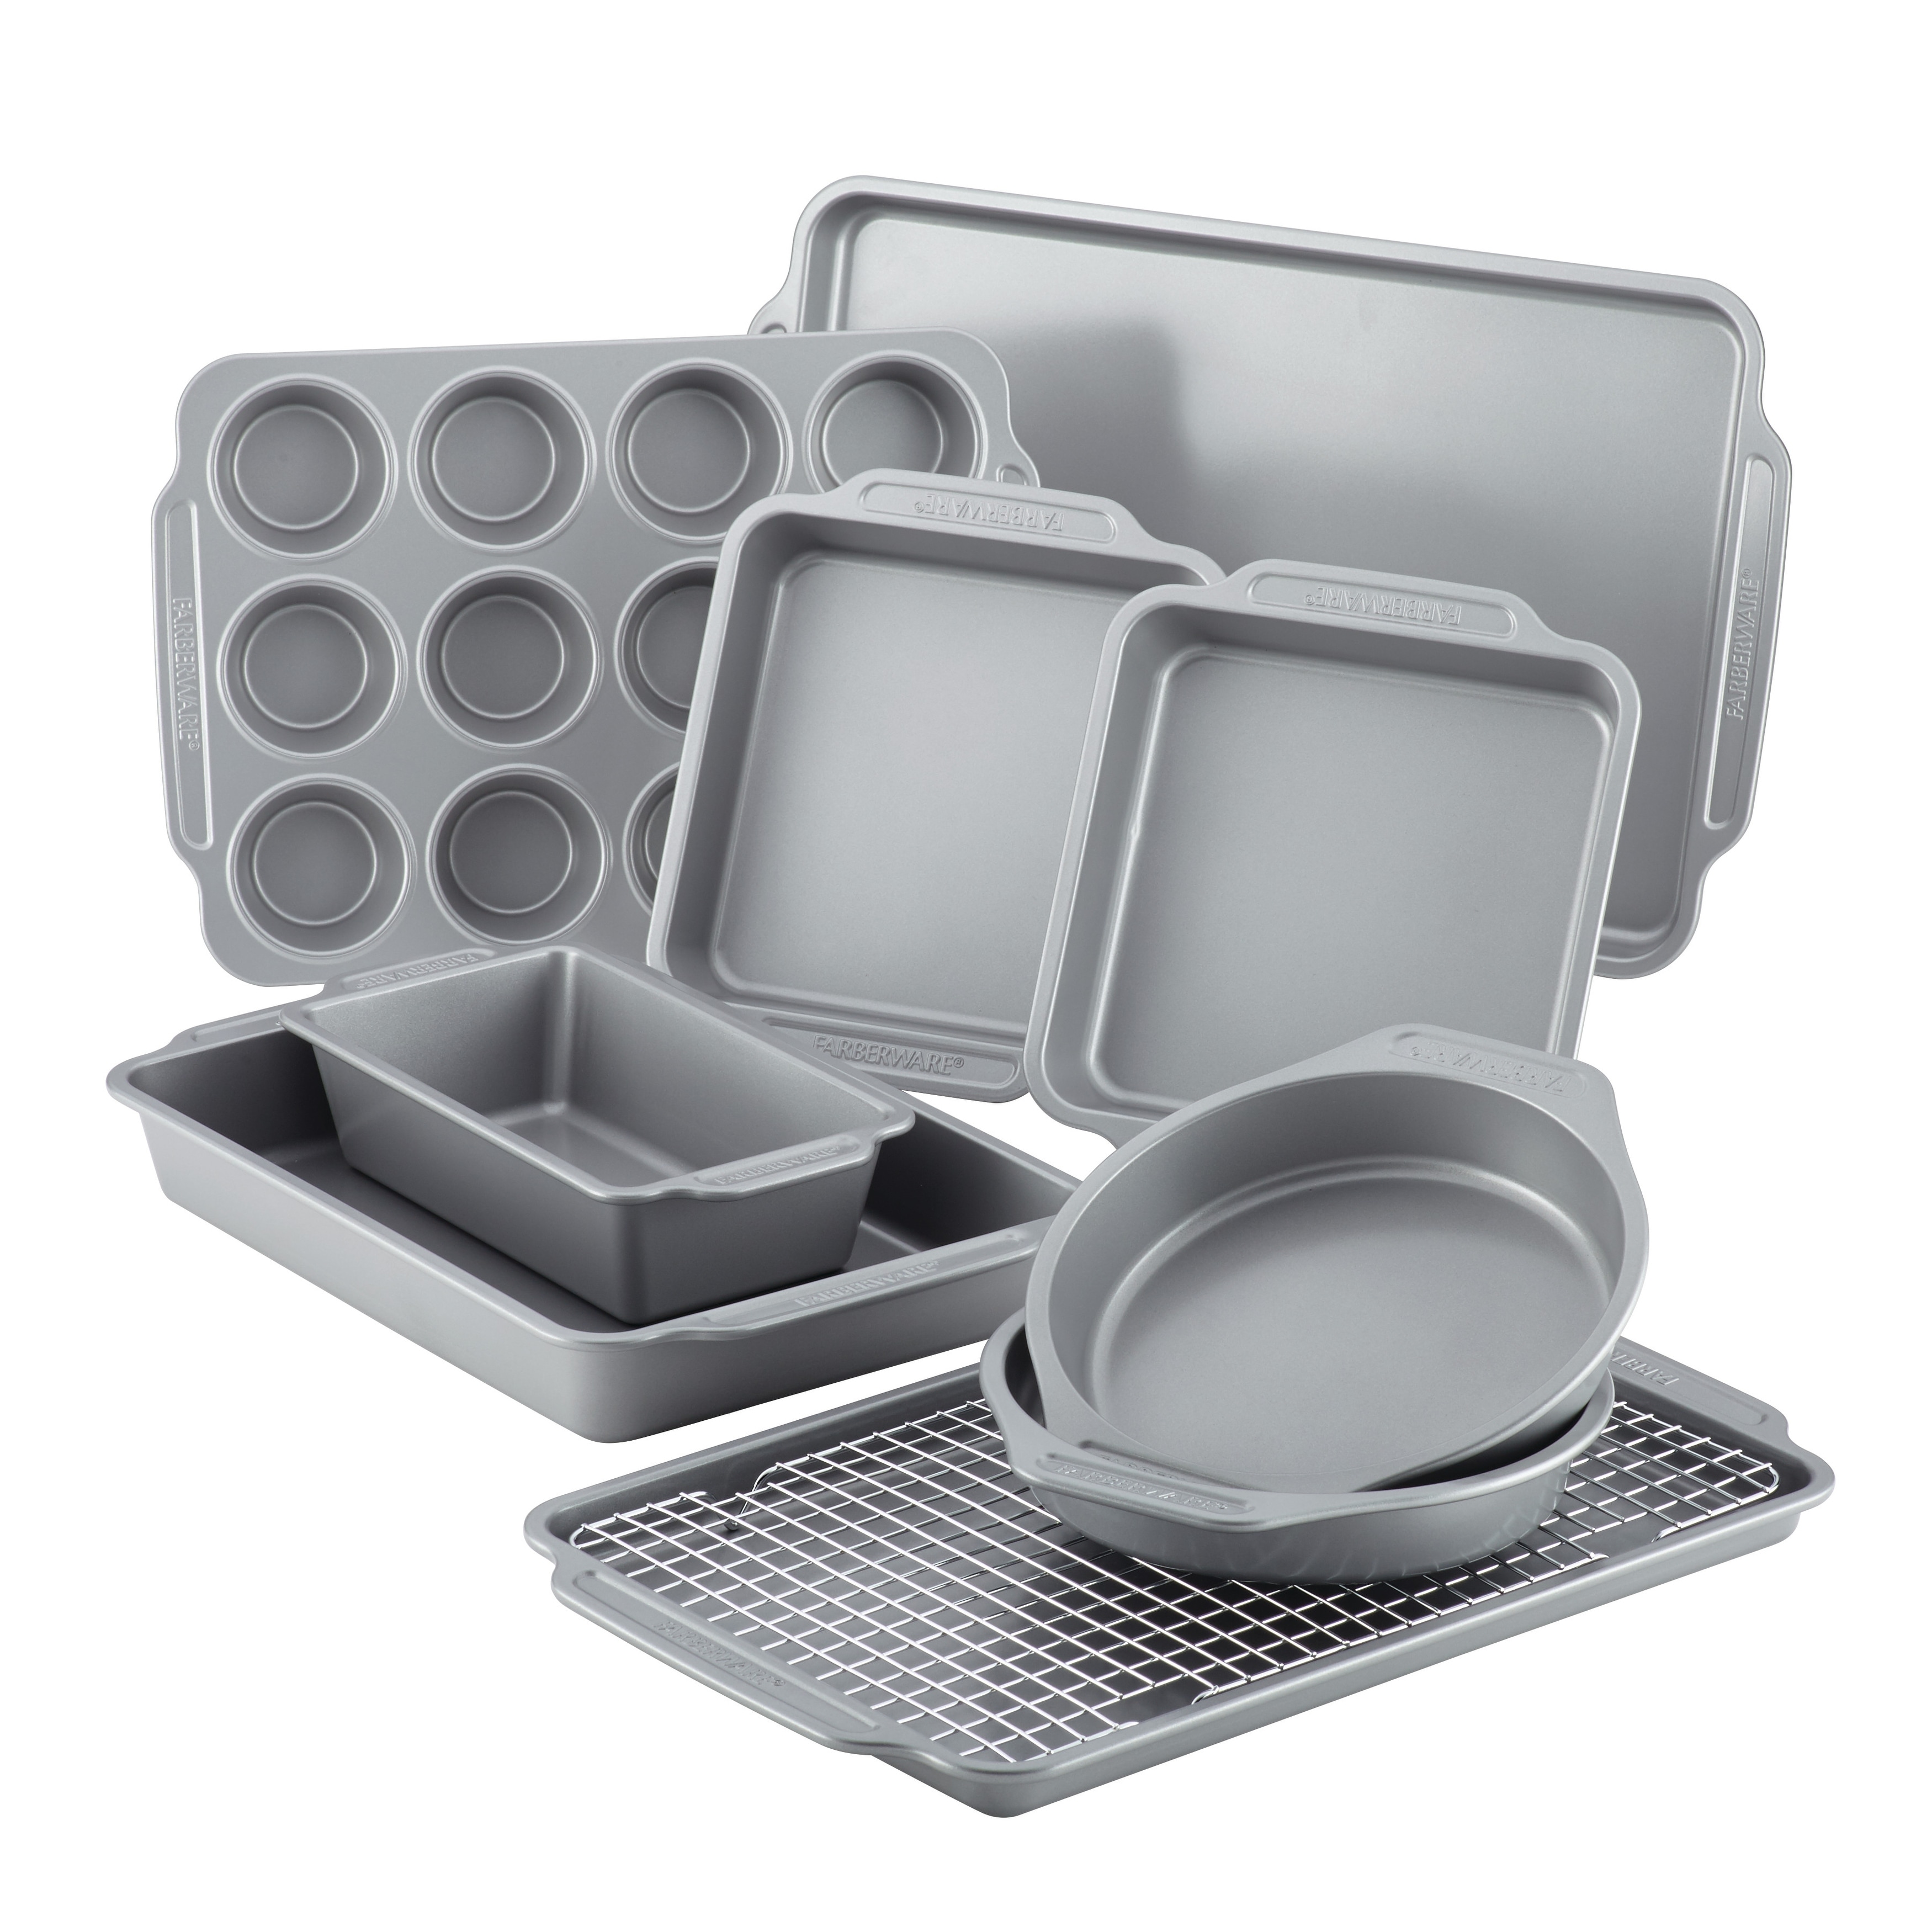 https://ak1.ostkcdn.com/images/products/is/images/direct/2174347bdb24cebf25f7b863e91fbe6052039788/Farberware-Nonstick-Bakeware-Set-with-Cooling-Rack%2C-10-Piece%2C-Gray.jpg